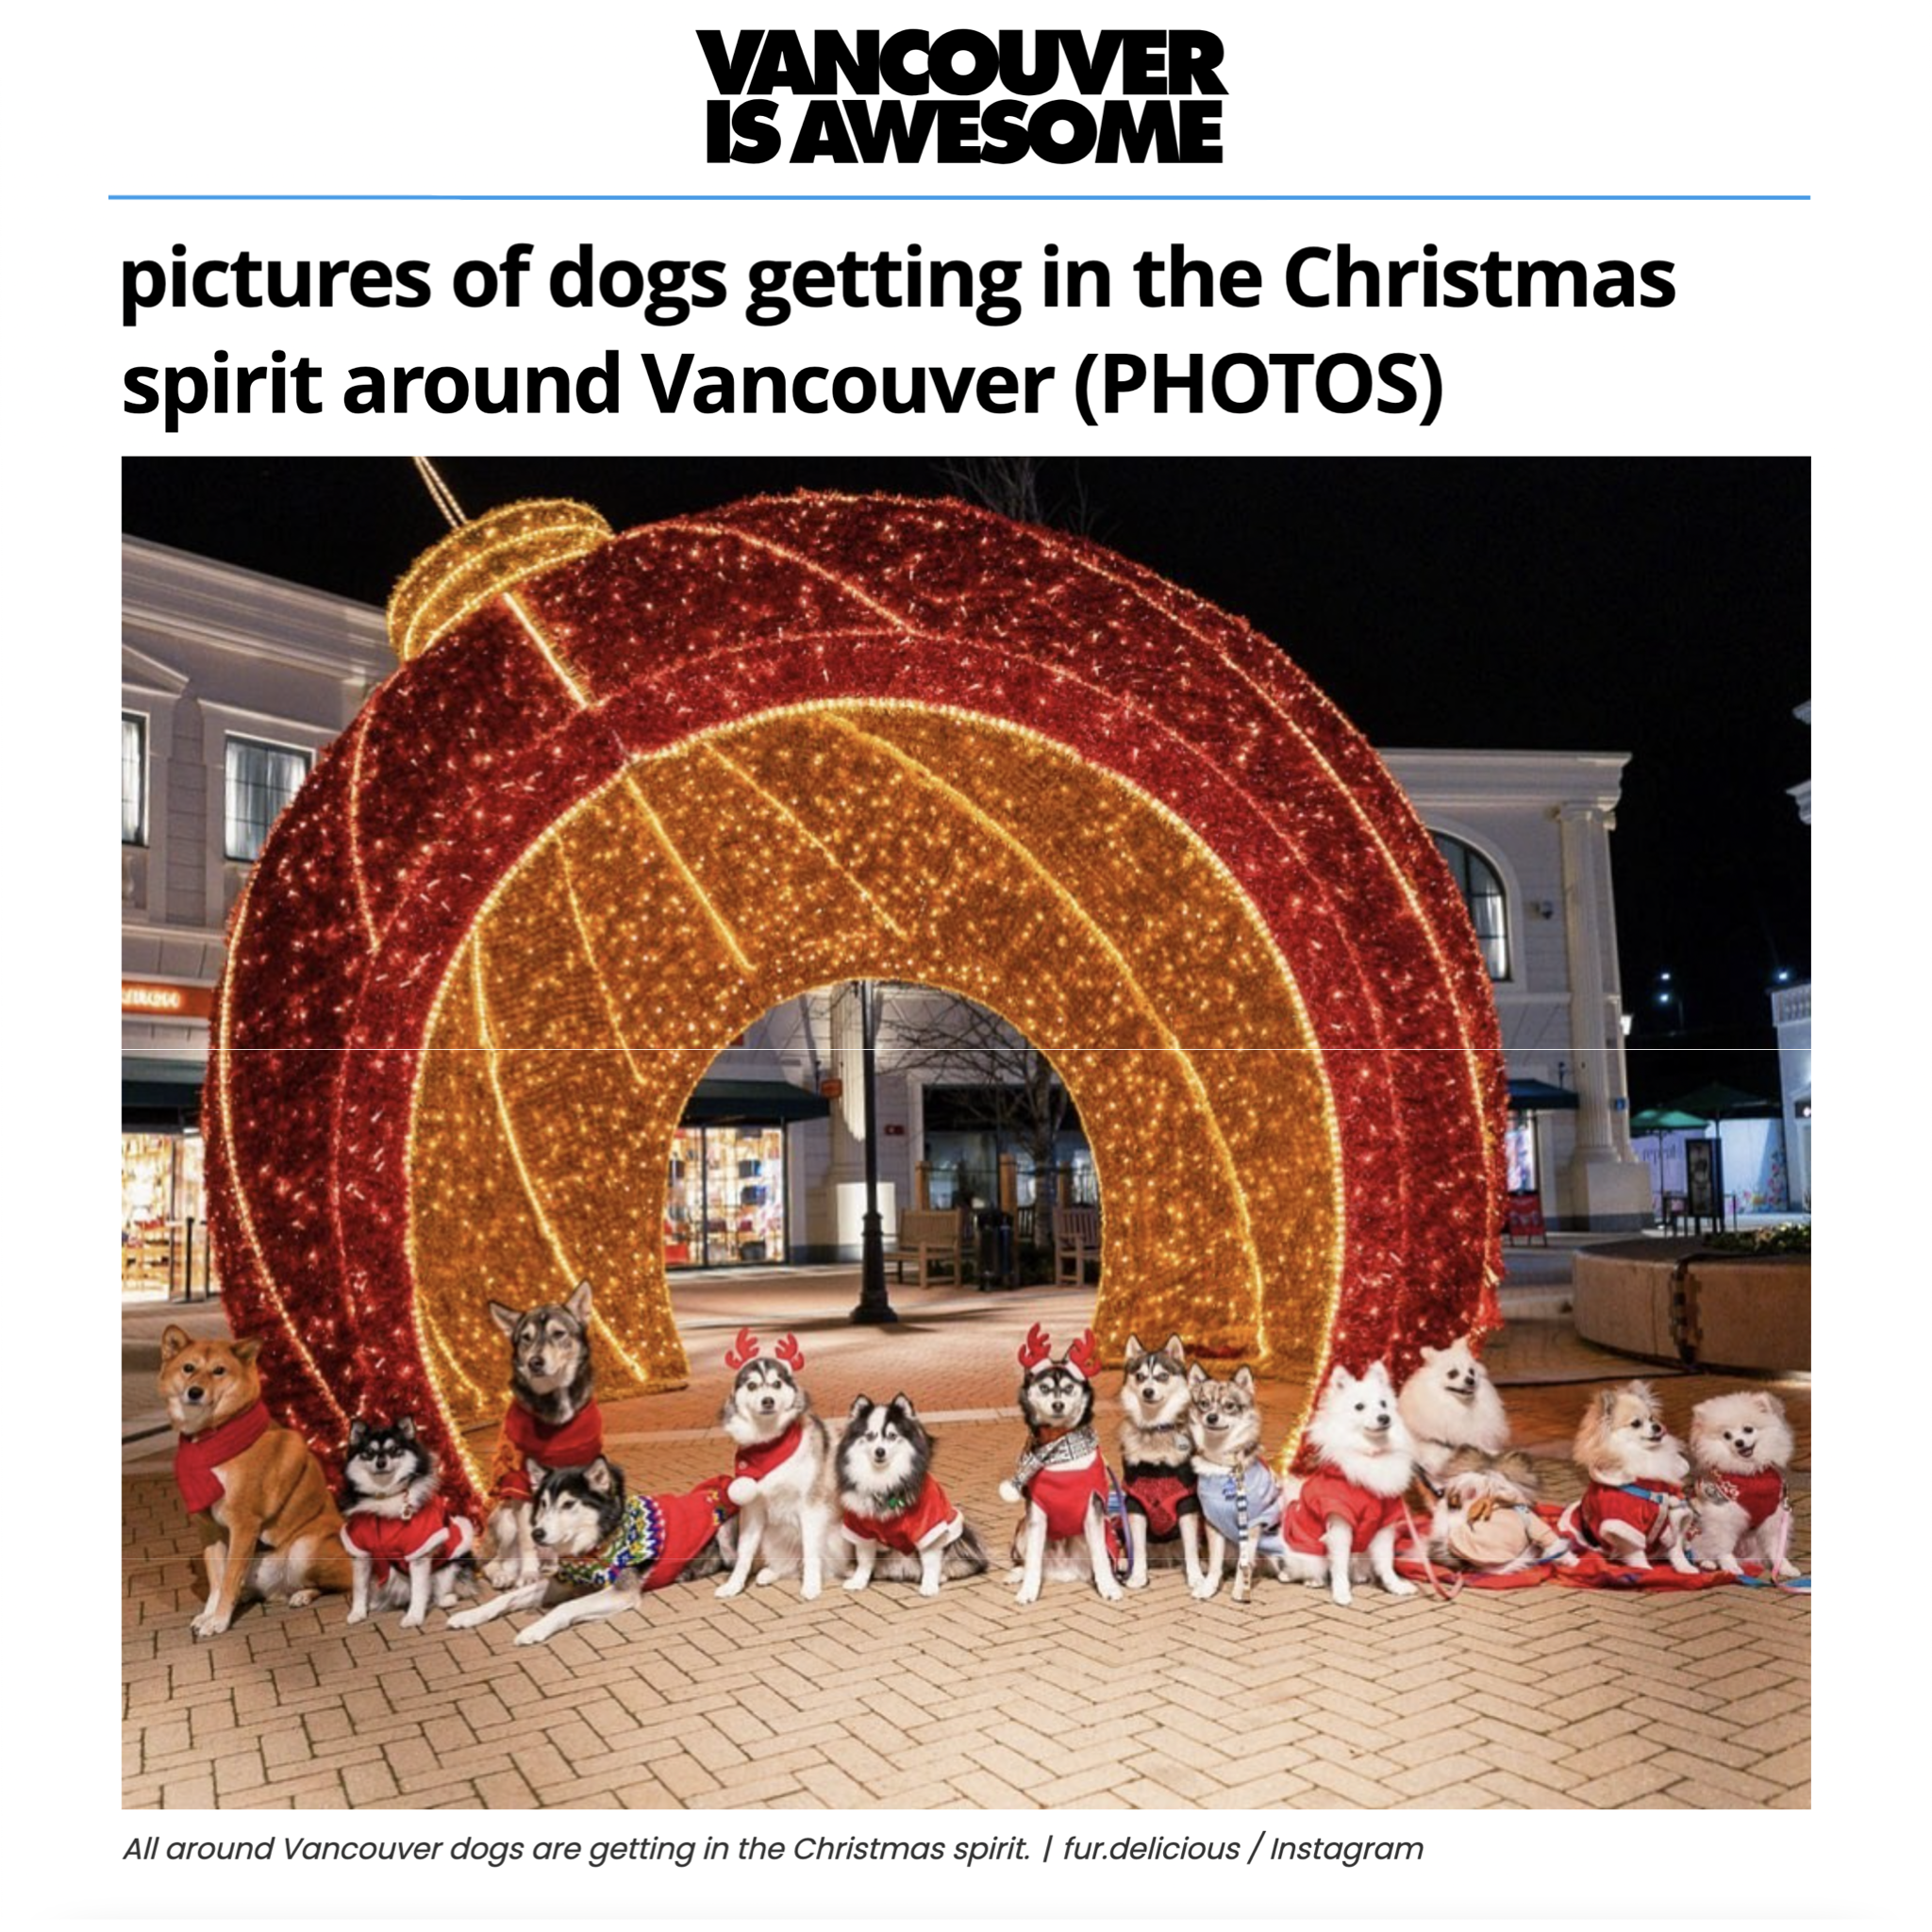 Dogs getting in the Christmas spirit around Vancouver